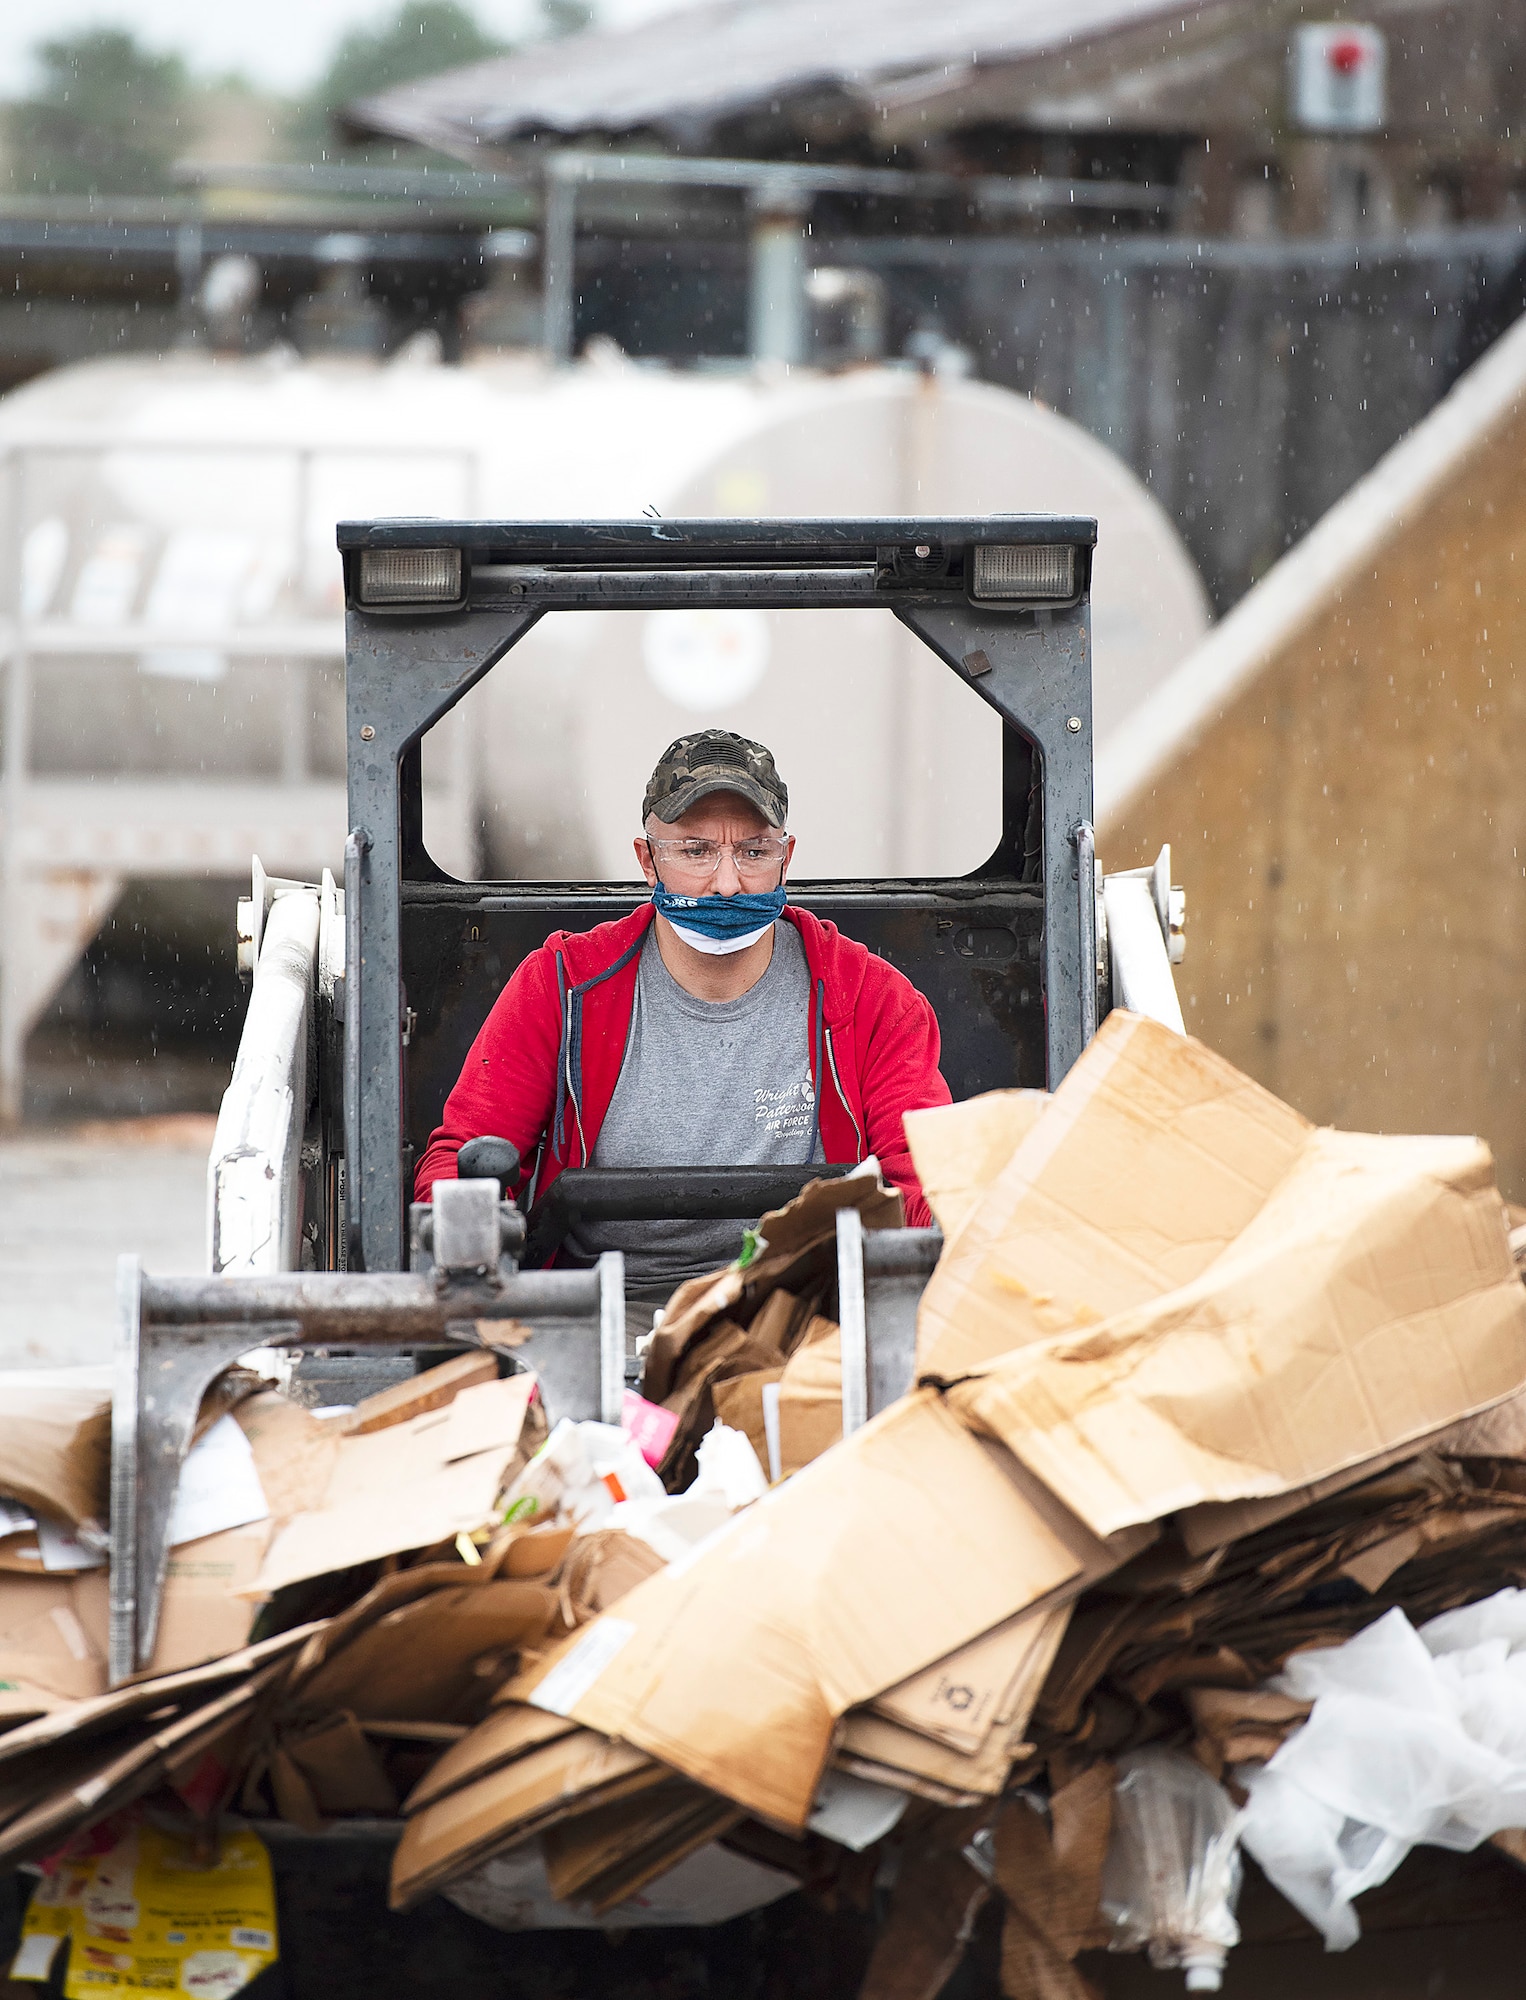 Dave Matheney, 88th Force Support Squadron, brings a load of mostly cardboard into the Recycling Center at Wright-Patterson Air Force Base, Ohio, on Sept. 22, 2021, for sorting and baling. Plastic in the lower right is the type of contaminant that comes from people throwing trash and other material into the wrong bin, adding labor and expense to the recycling process. (U.S. Air Force photo by R.J. Oriez)